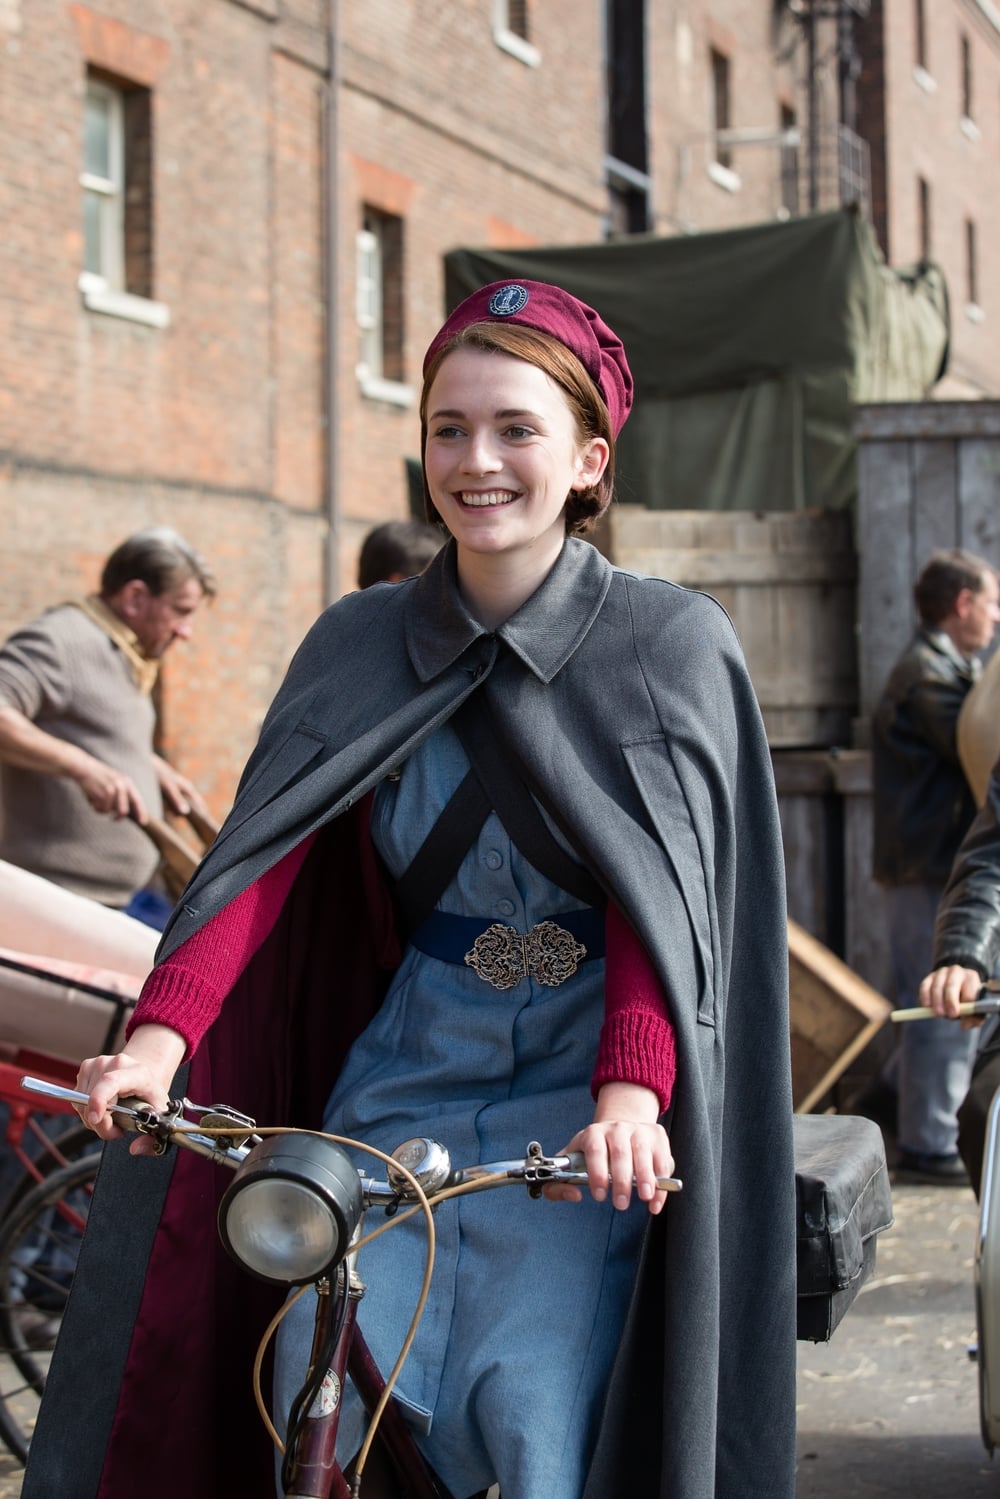 Charlotte Ritchie as nurse Barbara Gilbert in Call The Midwife. image - supplied/BBCWorldwideANZ